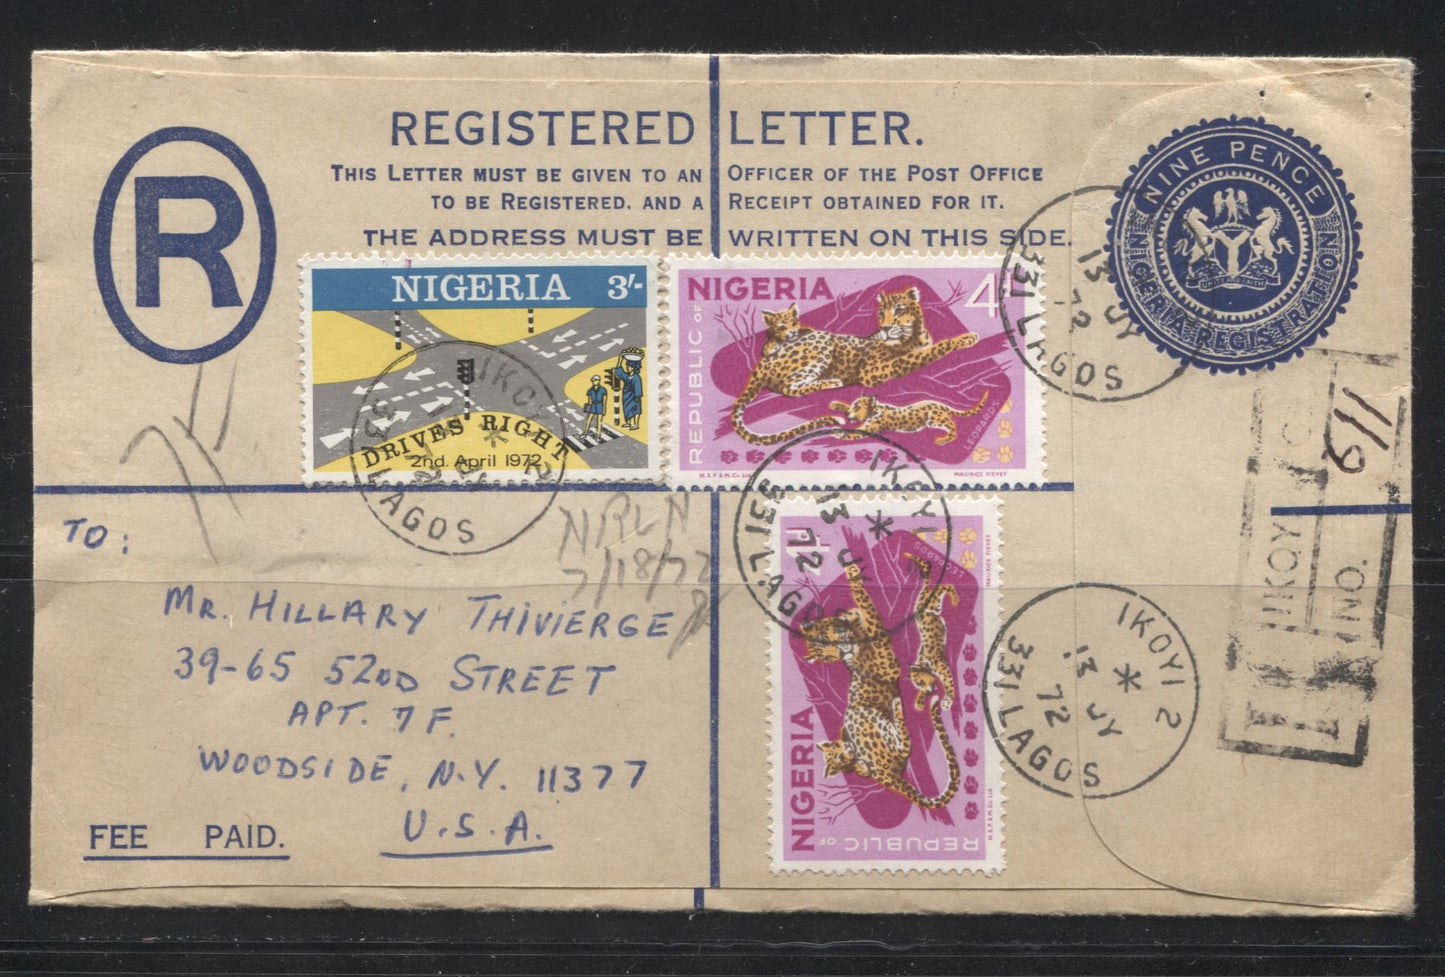 Lot 292 Nigeria SG#224, 276 4d & 3/- Multicoloured Leopards and Road Junction, 1965-1972 Wildlife Definitive Issue & Nigeria Drives Right Issue, A VF 1972 4/5d Registered Airmail Cover to USA On 9d Registered Envelope, Ikoy Registered Boxed Handstamp